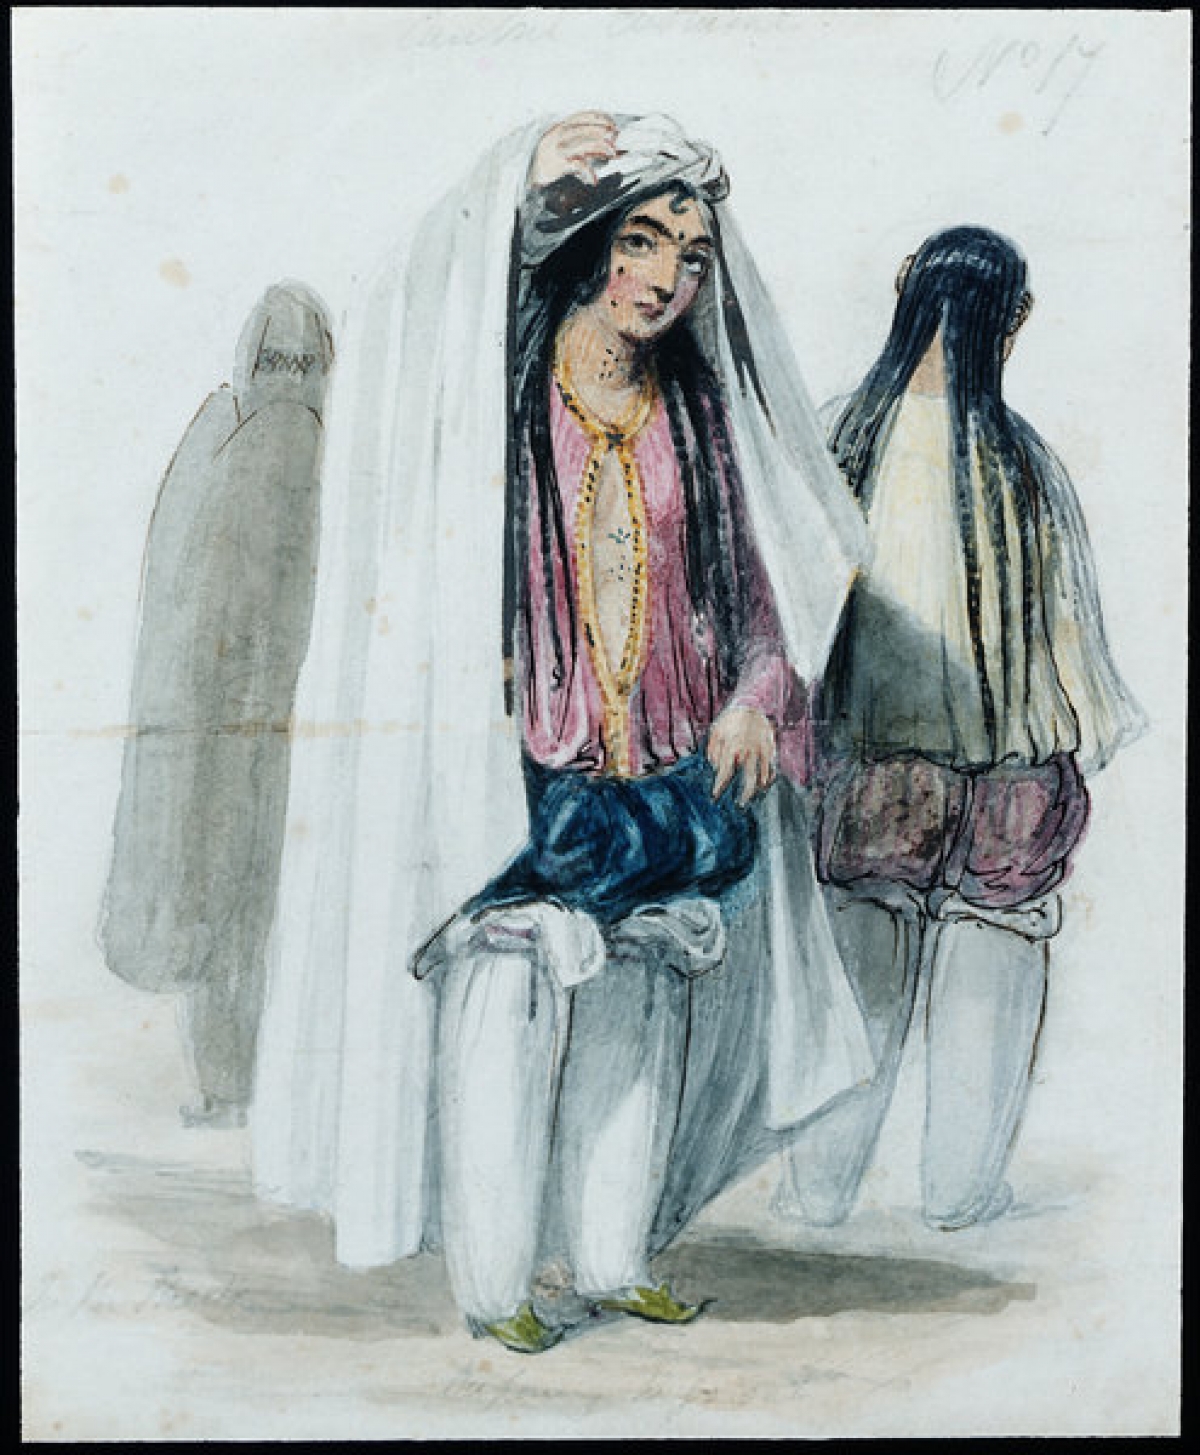 “Cabul Costume. In the Street. Preparing to go out.” Water colour by James Atkinson, c. 1840, showing a lady in Kabul with her chadari and under garments.